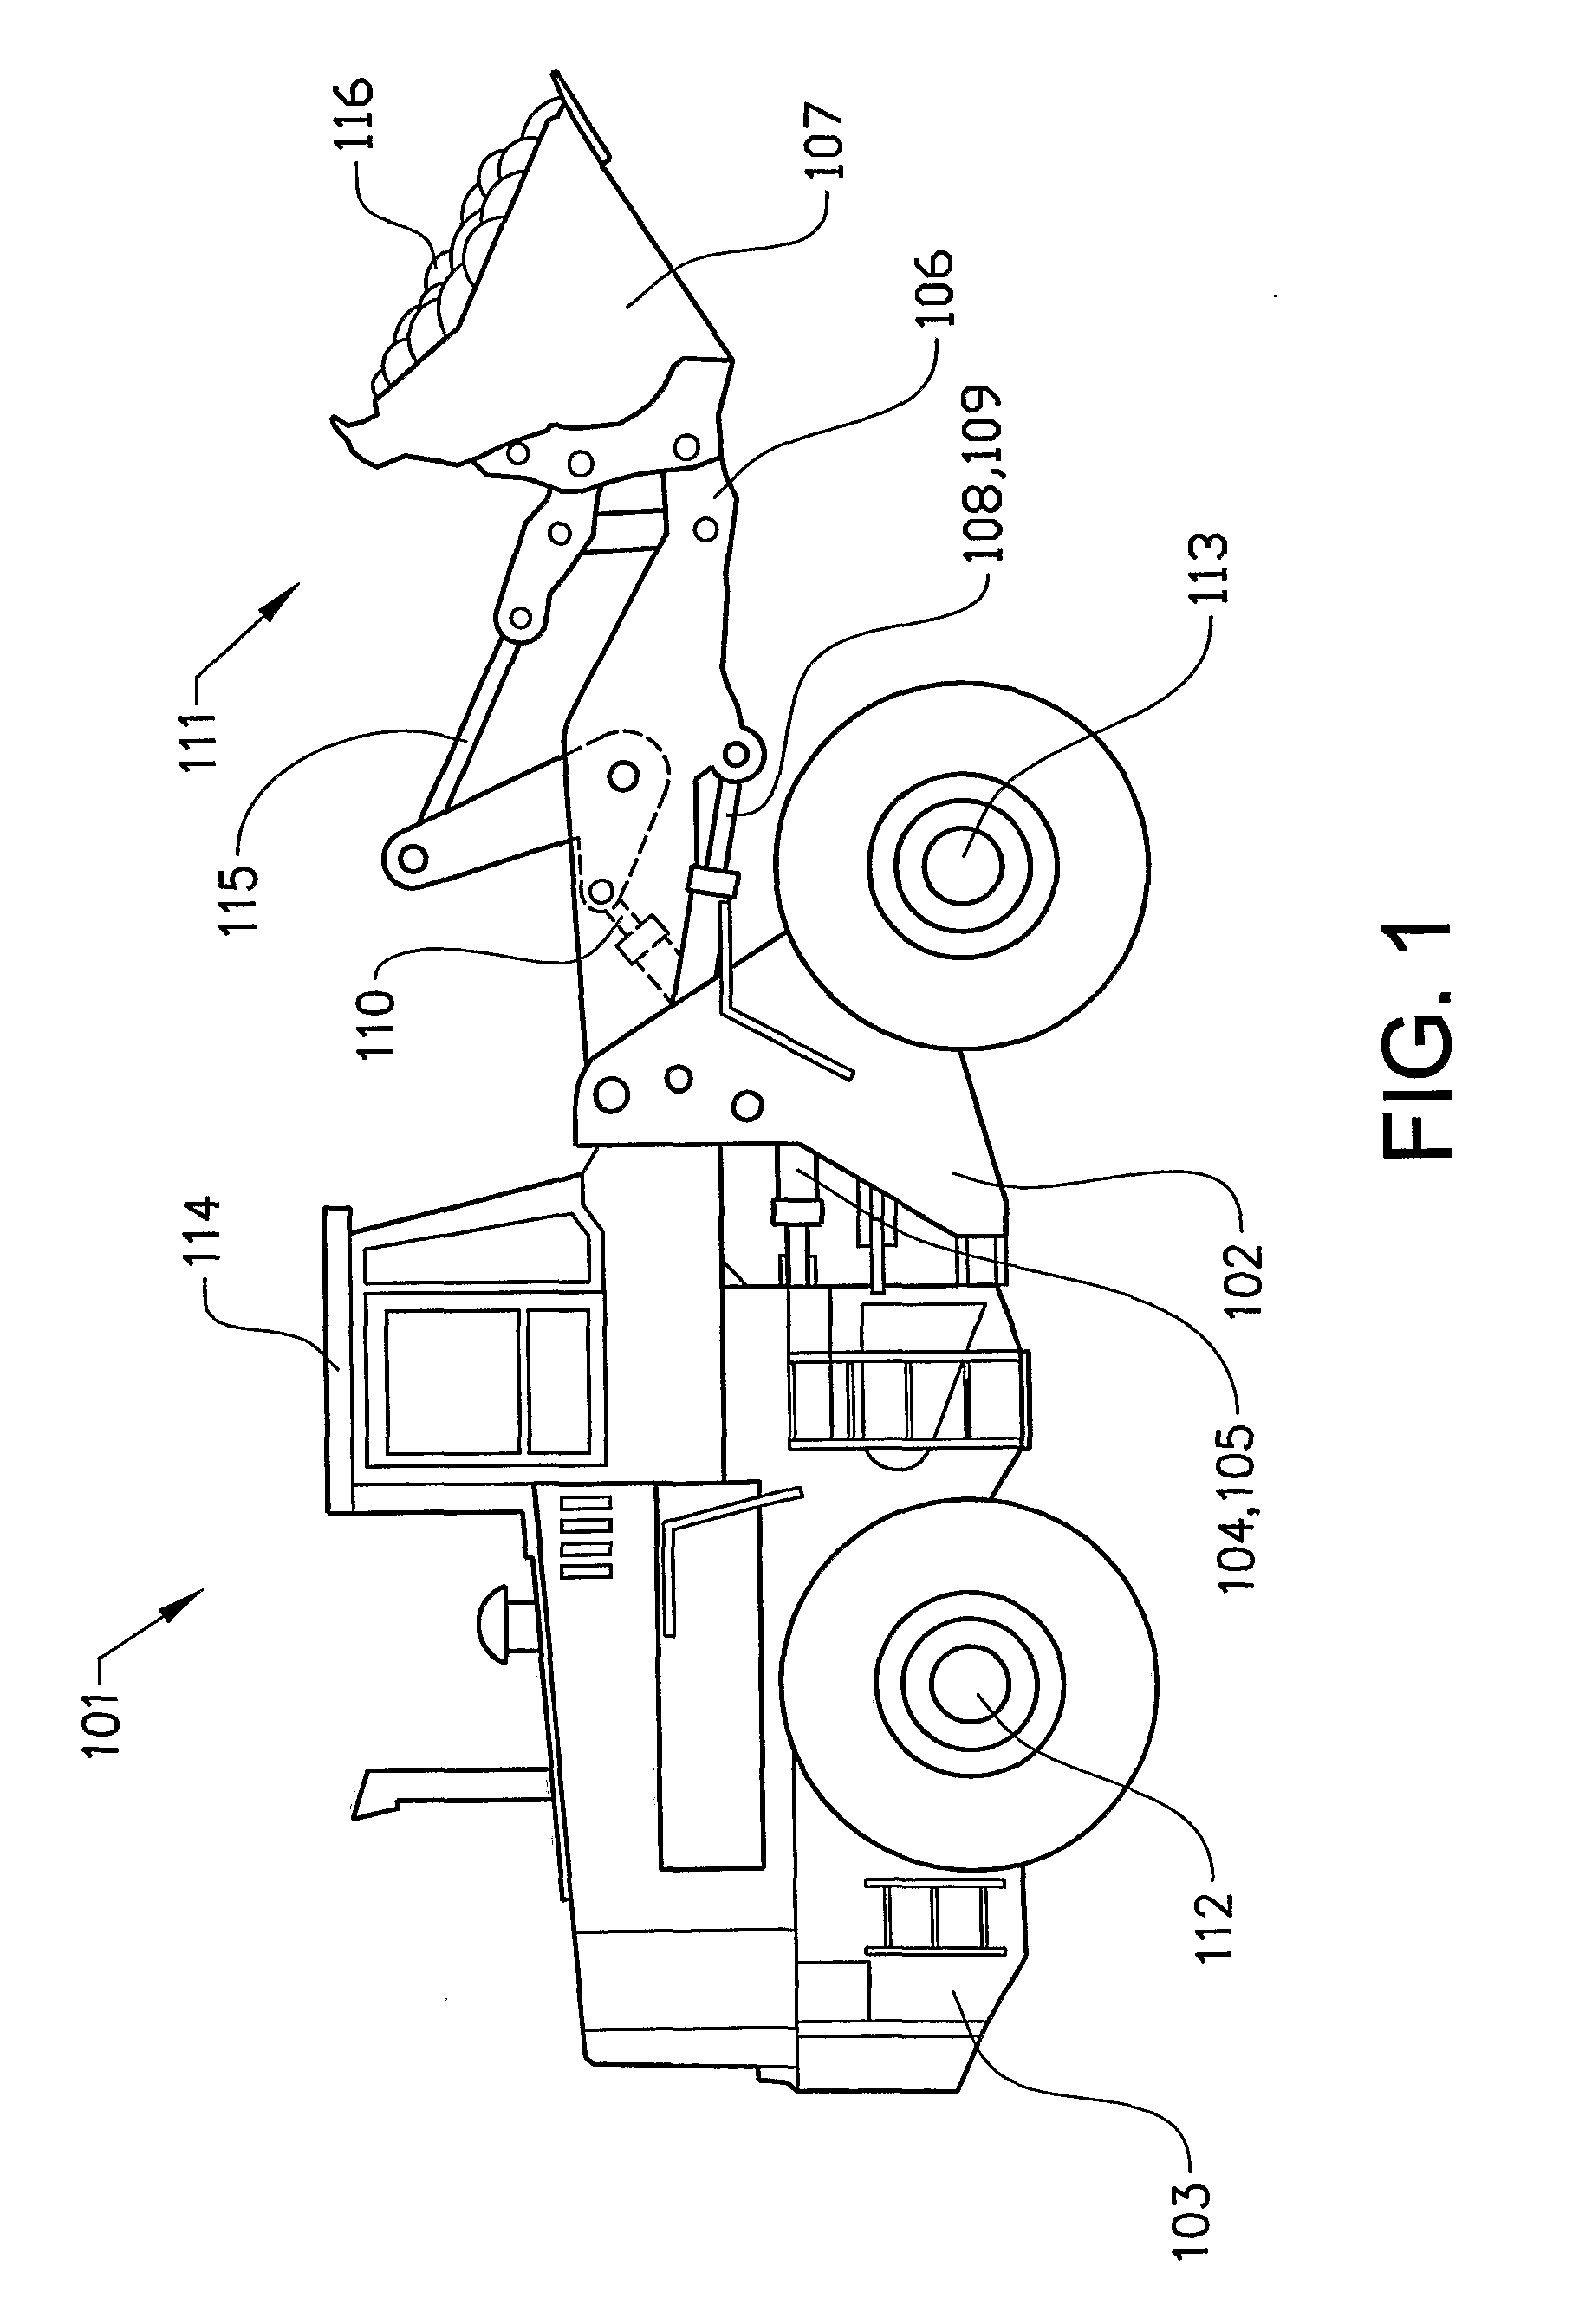 Method and a system for providing feedback to a vehicle operator